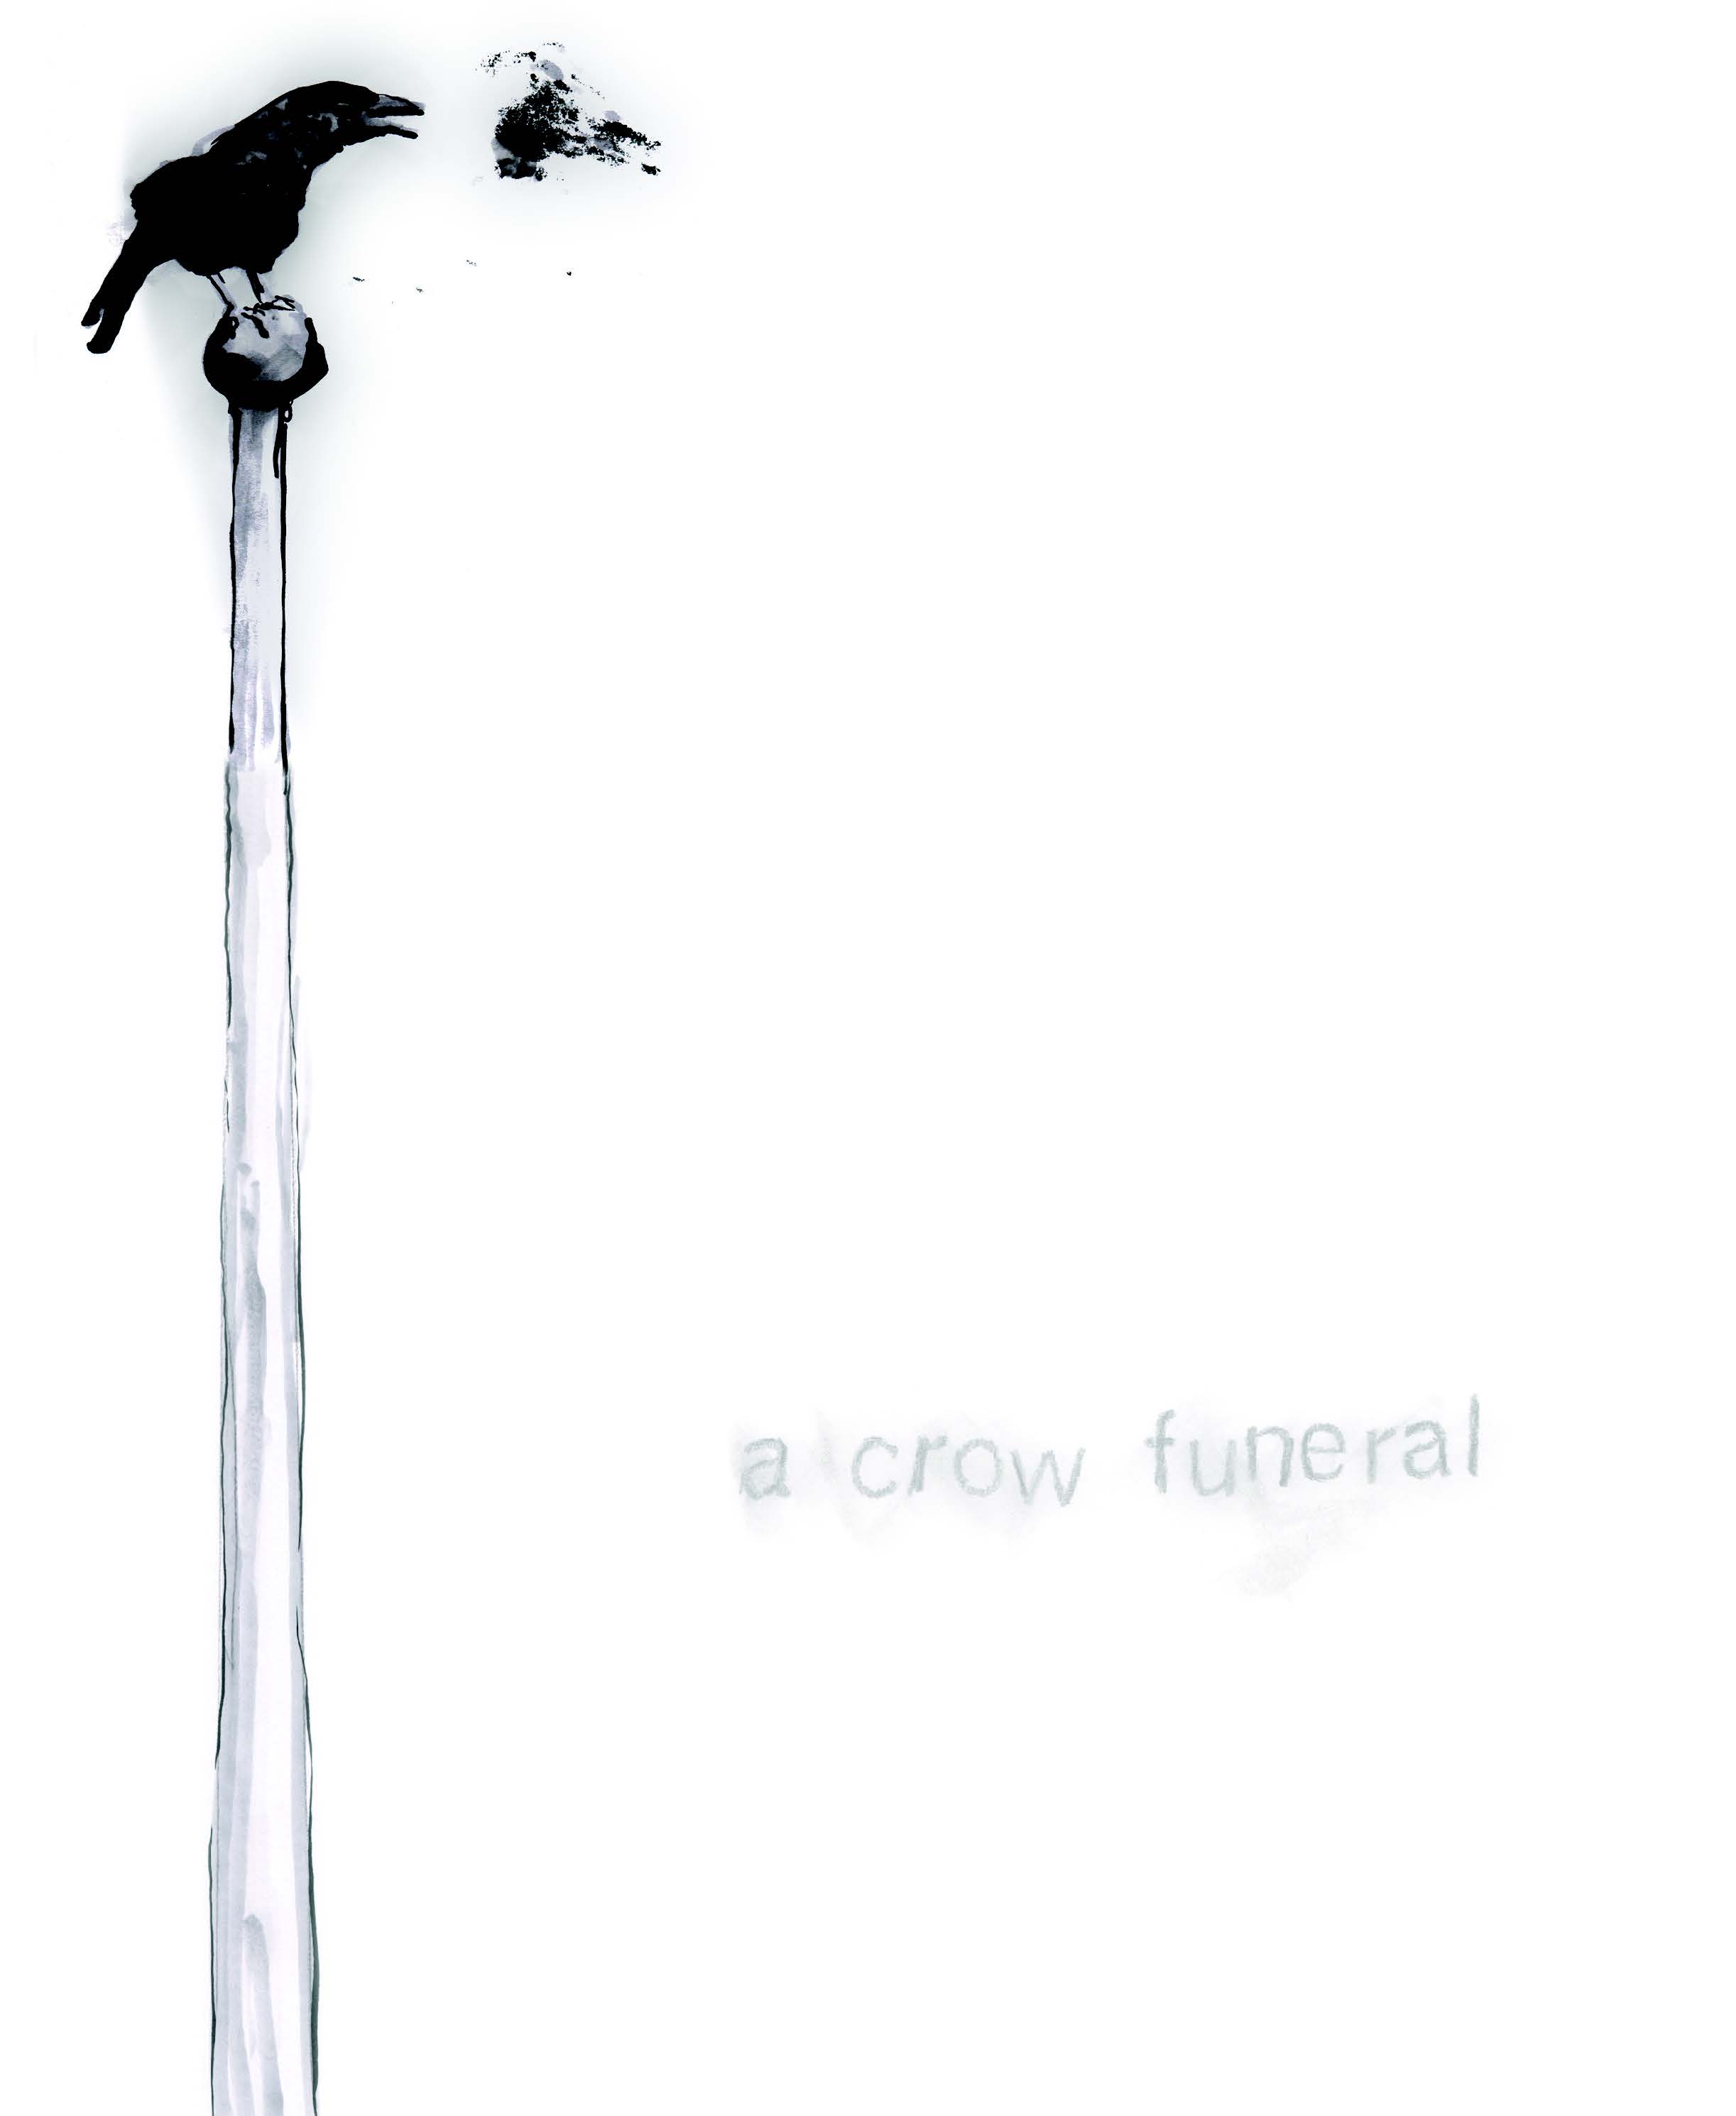 Actual Play – A Crow Funeral (6/18/2016)